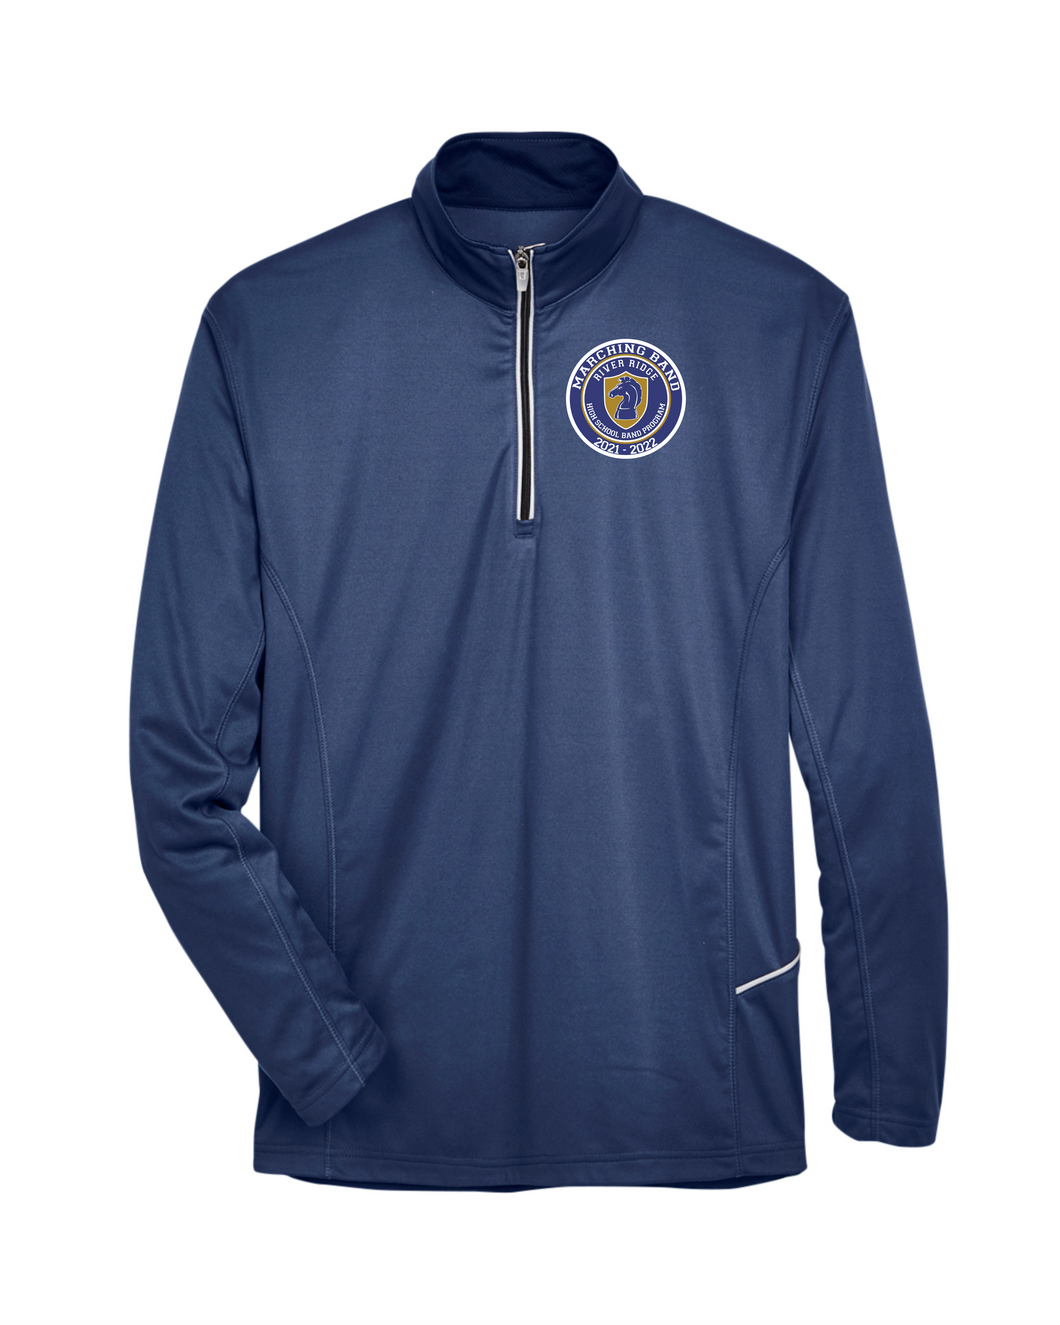 RR-BND-107-2 - UltraClub Cool & Dry Sport Quarter-Zip Pullover - RR Marching Band Logo